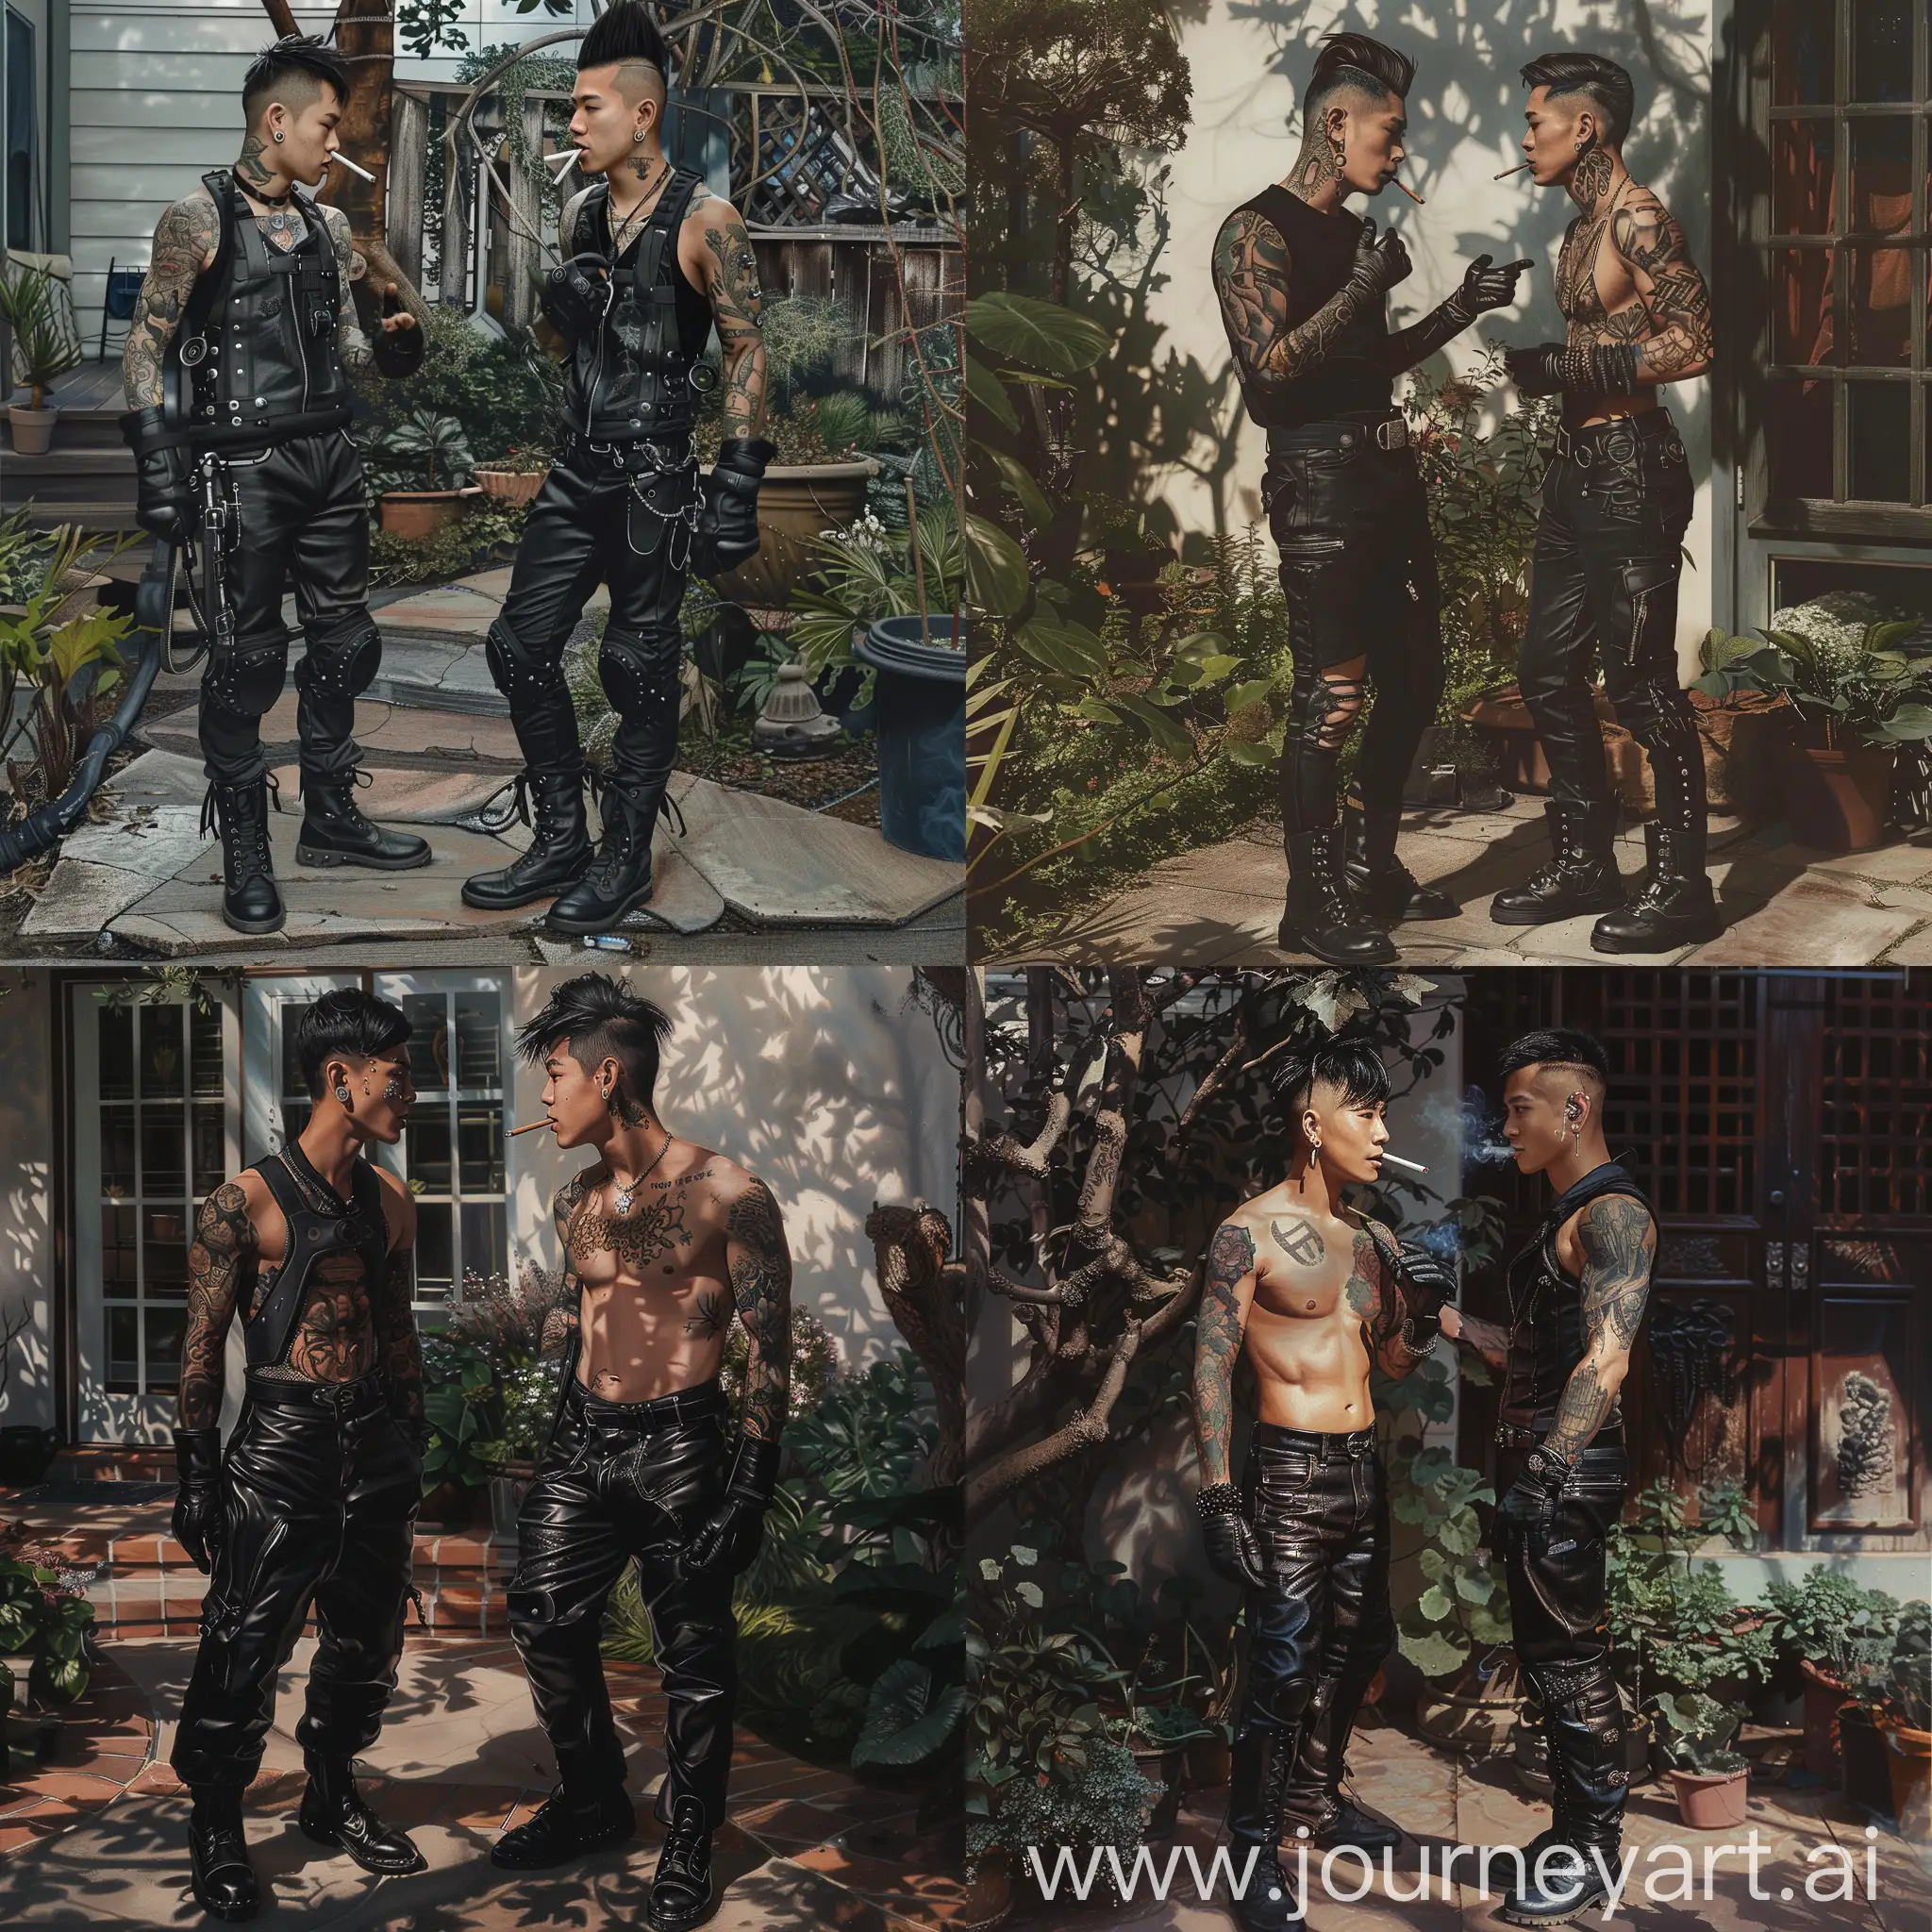 Photorealism, 2 asian young fit men standing and talking at the garden in the house, both of them are wearing black leather gloves, pants and boots. Full body tattoo. Multiple ear piercings and facial piercings. Smoking.